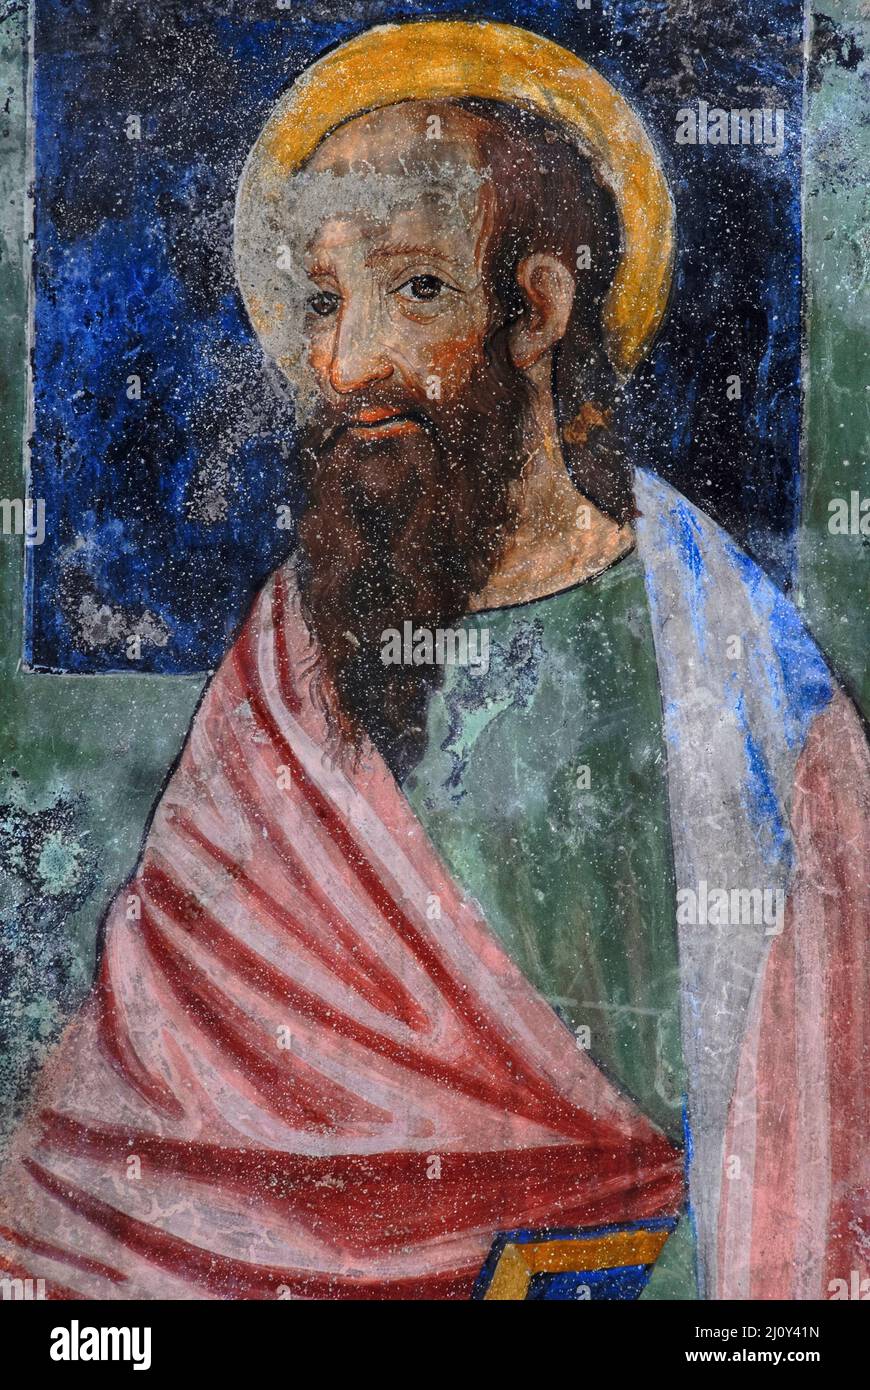 Saint Paul the Apostle in 1400s Piedmontese Late Gothic fresco cycle.  Immediately below quadripartite ceiling vault in the church of the former Franciscan convent of San Francesco at Susa, Piedmont, Italy. Stock Photo